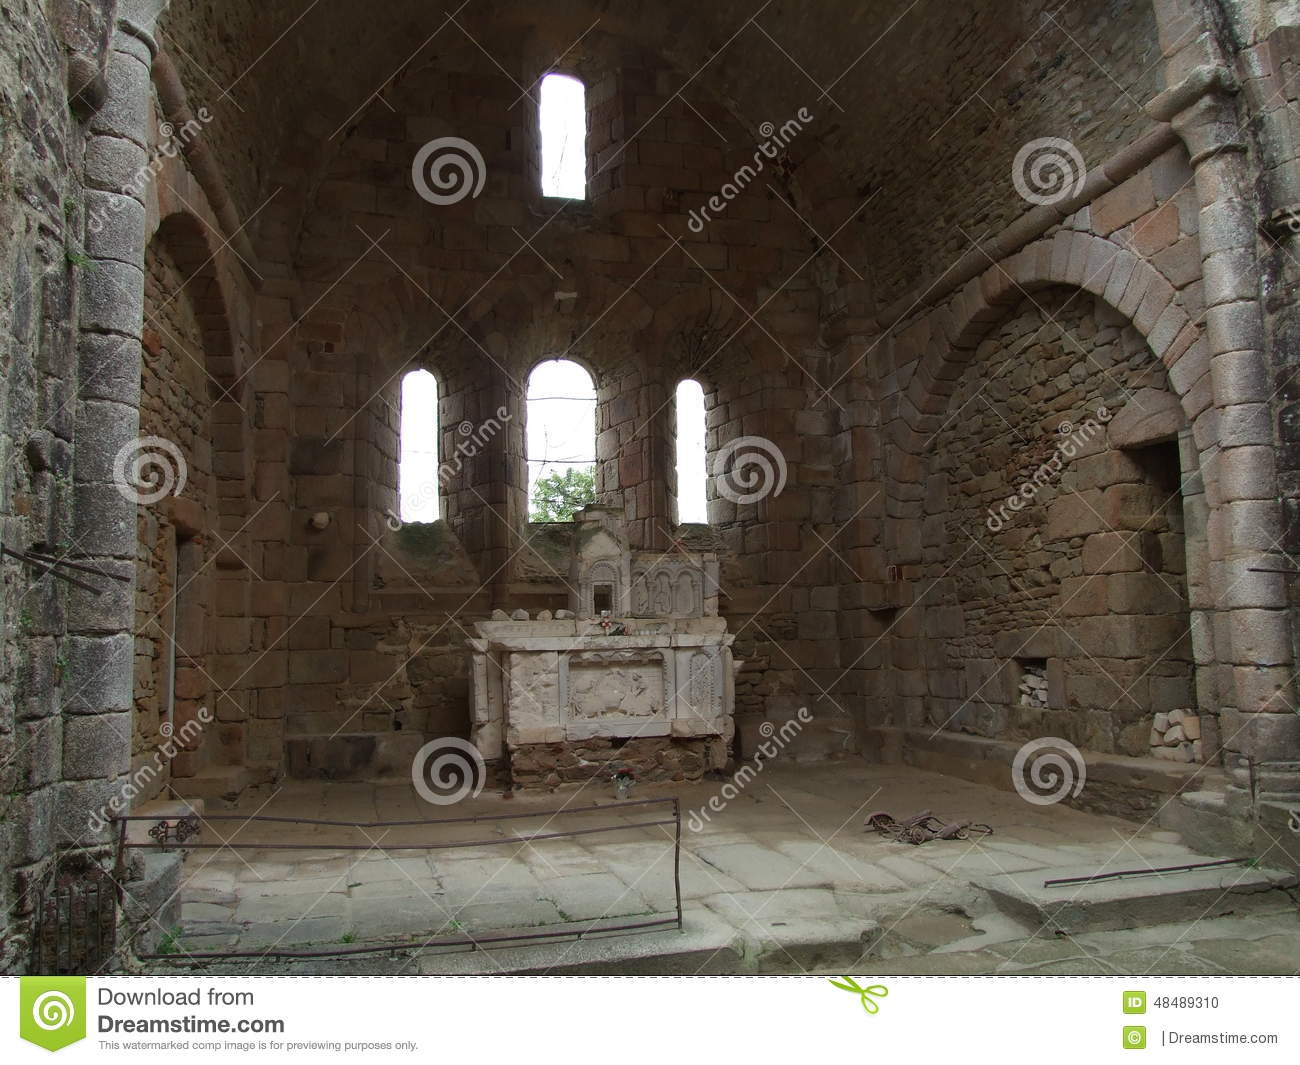 The Church At Oradour Sur Glane, France Stock Images.